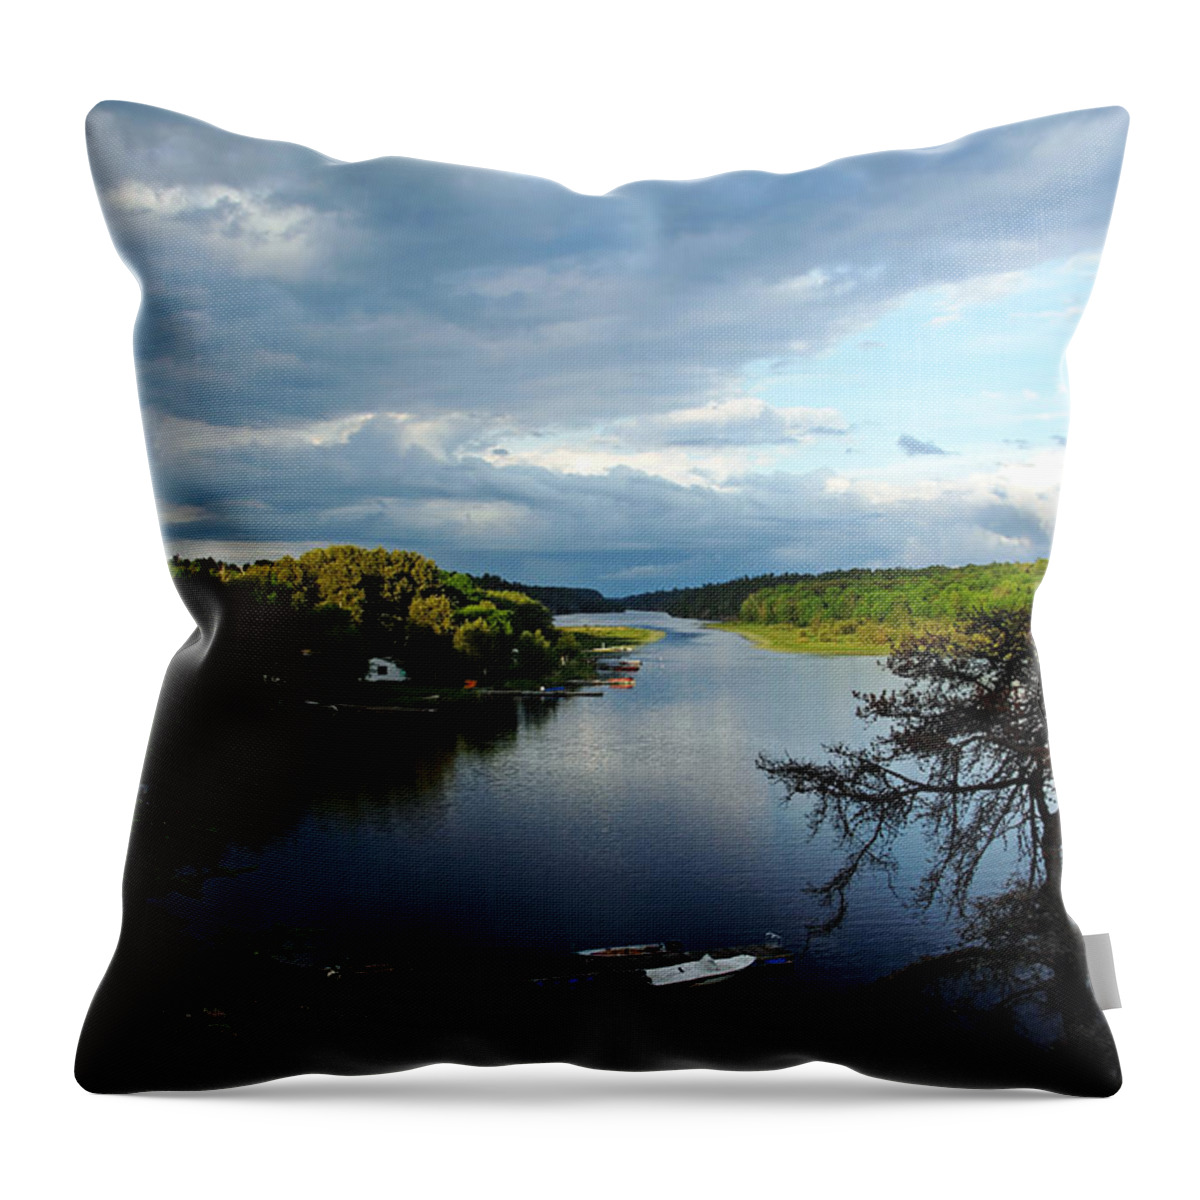 Key River Throw Pillow featuring the photograph Breaking Through by Debbie Oppermann